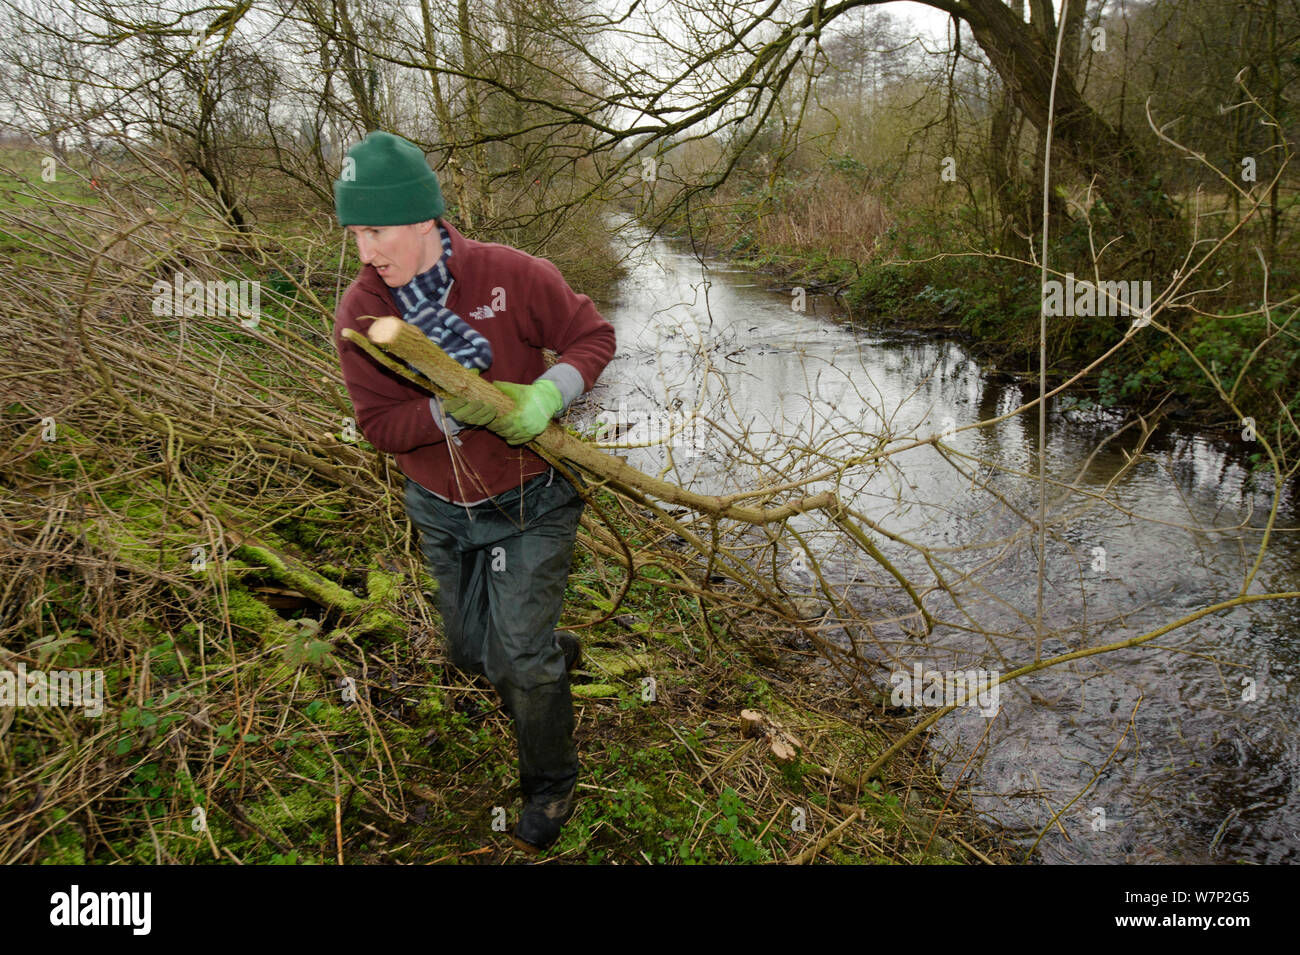 A volunteer from the Wildwood trust removes branches, as trees are cut down to improve water vole habitat on a stream and to allow growth of bankside vegetation, East Malling, Kent England, February 2011 Stock Photo